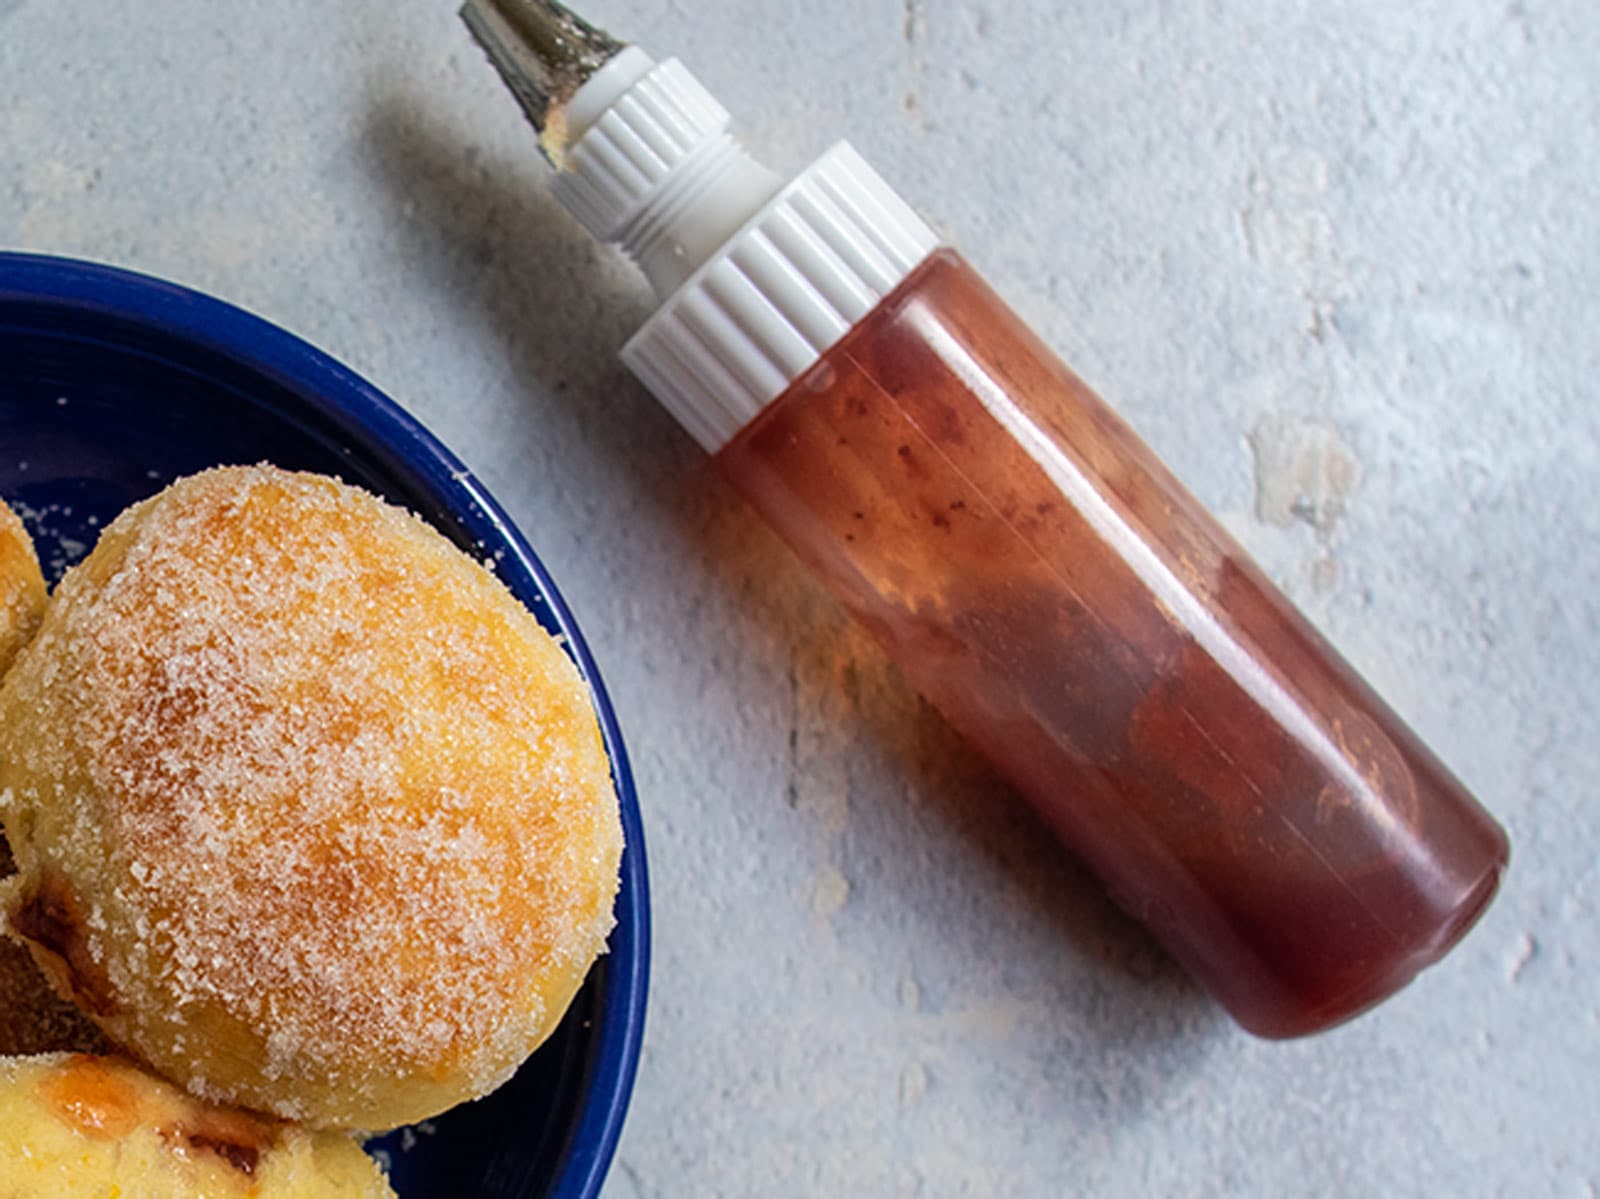 Jam in squeeze bottle next to a bowl of baked sufganiyot.